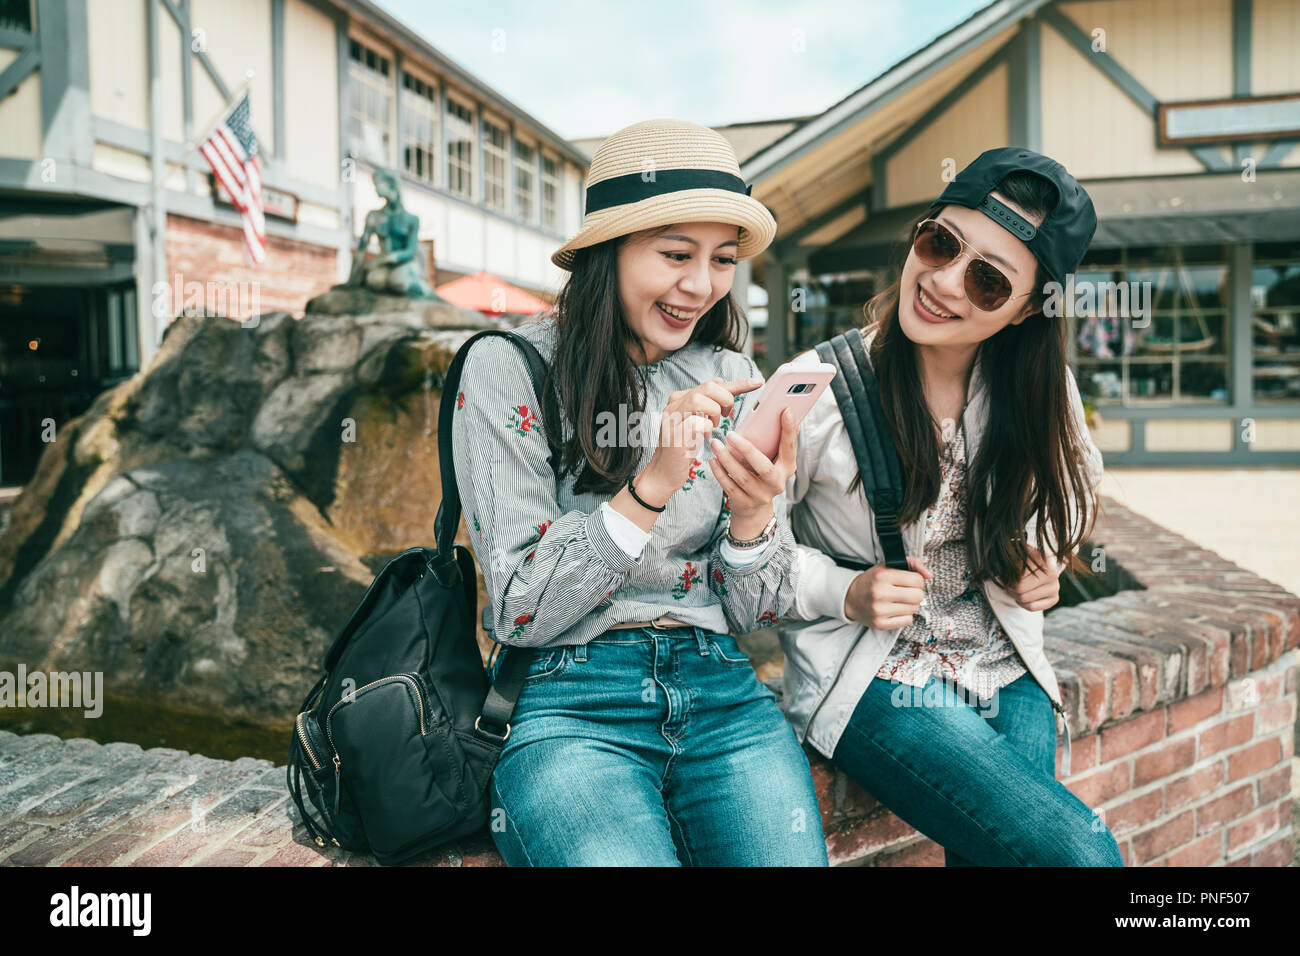 two happy girls talking and laughing joyfully while taking a break sitting next to the fountain Stock Photo